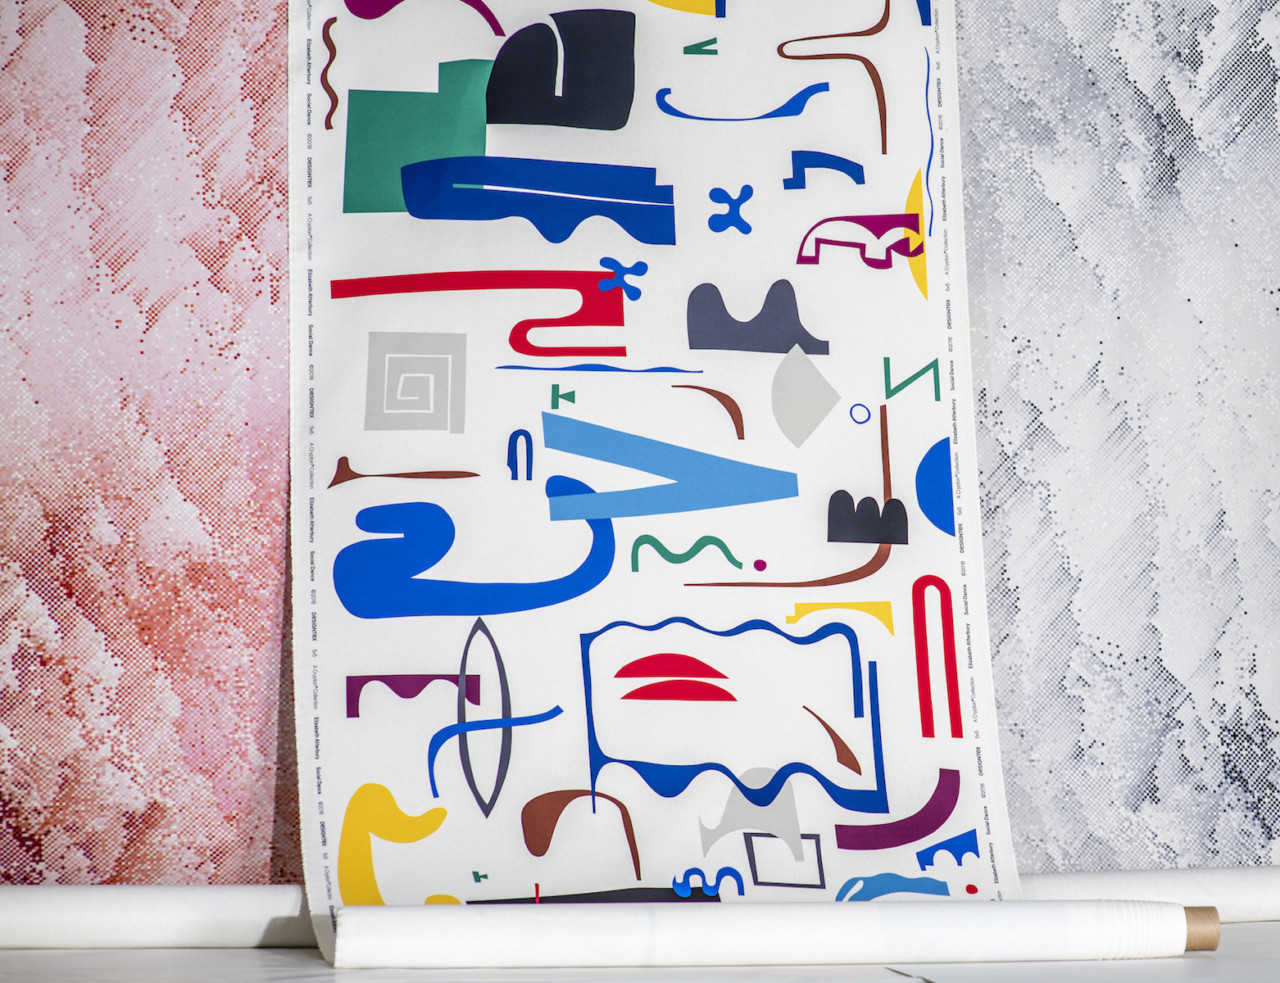 DesignTex and Crypton Launch 5x5 Collection of Printed Fabrics by Contemporary Artists